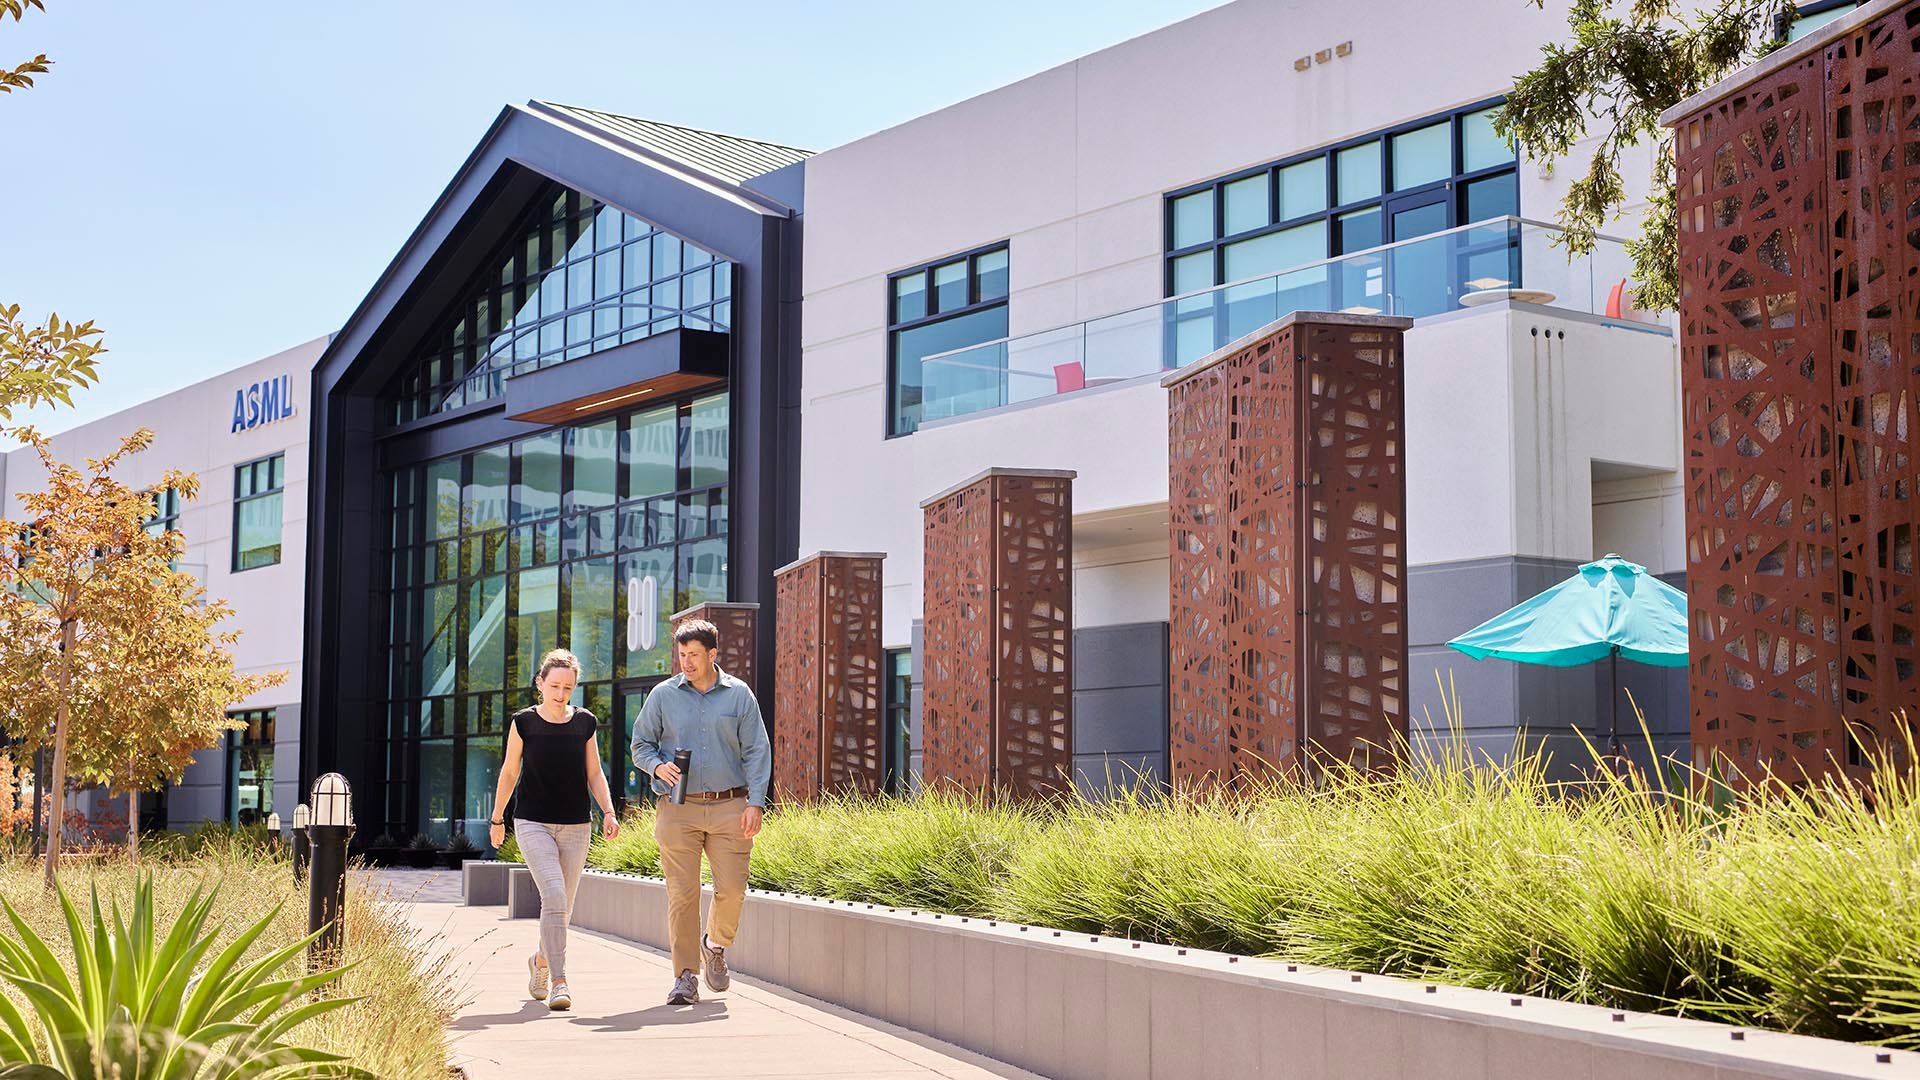 Employees walking in front of new Silicon Valley building